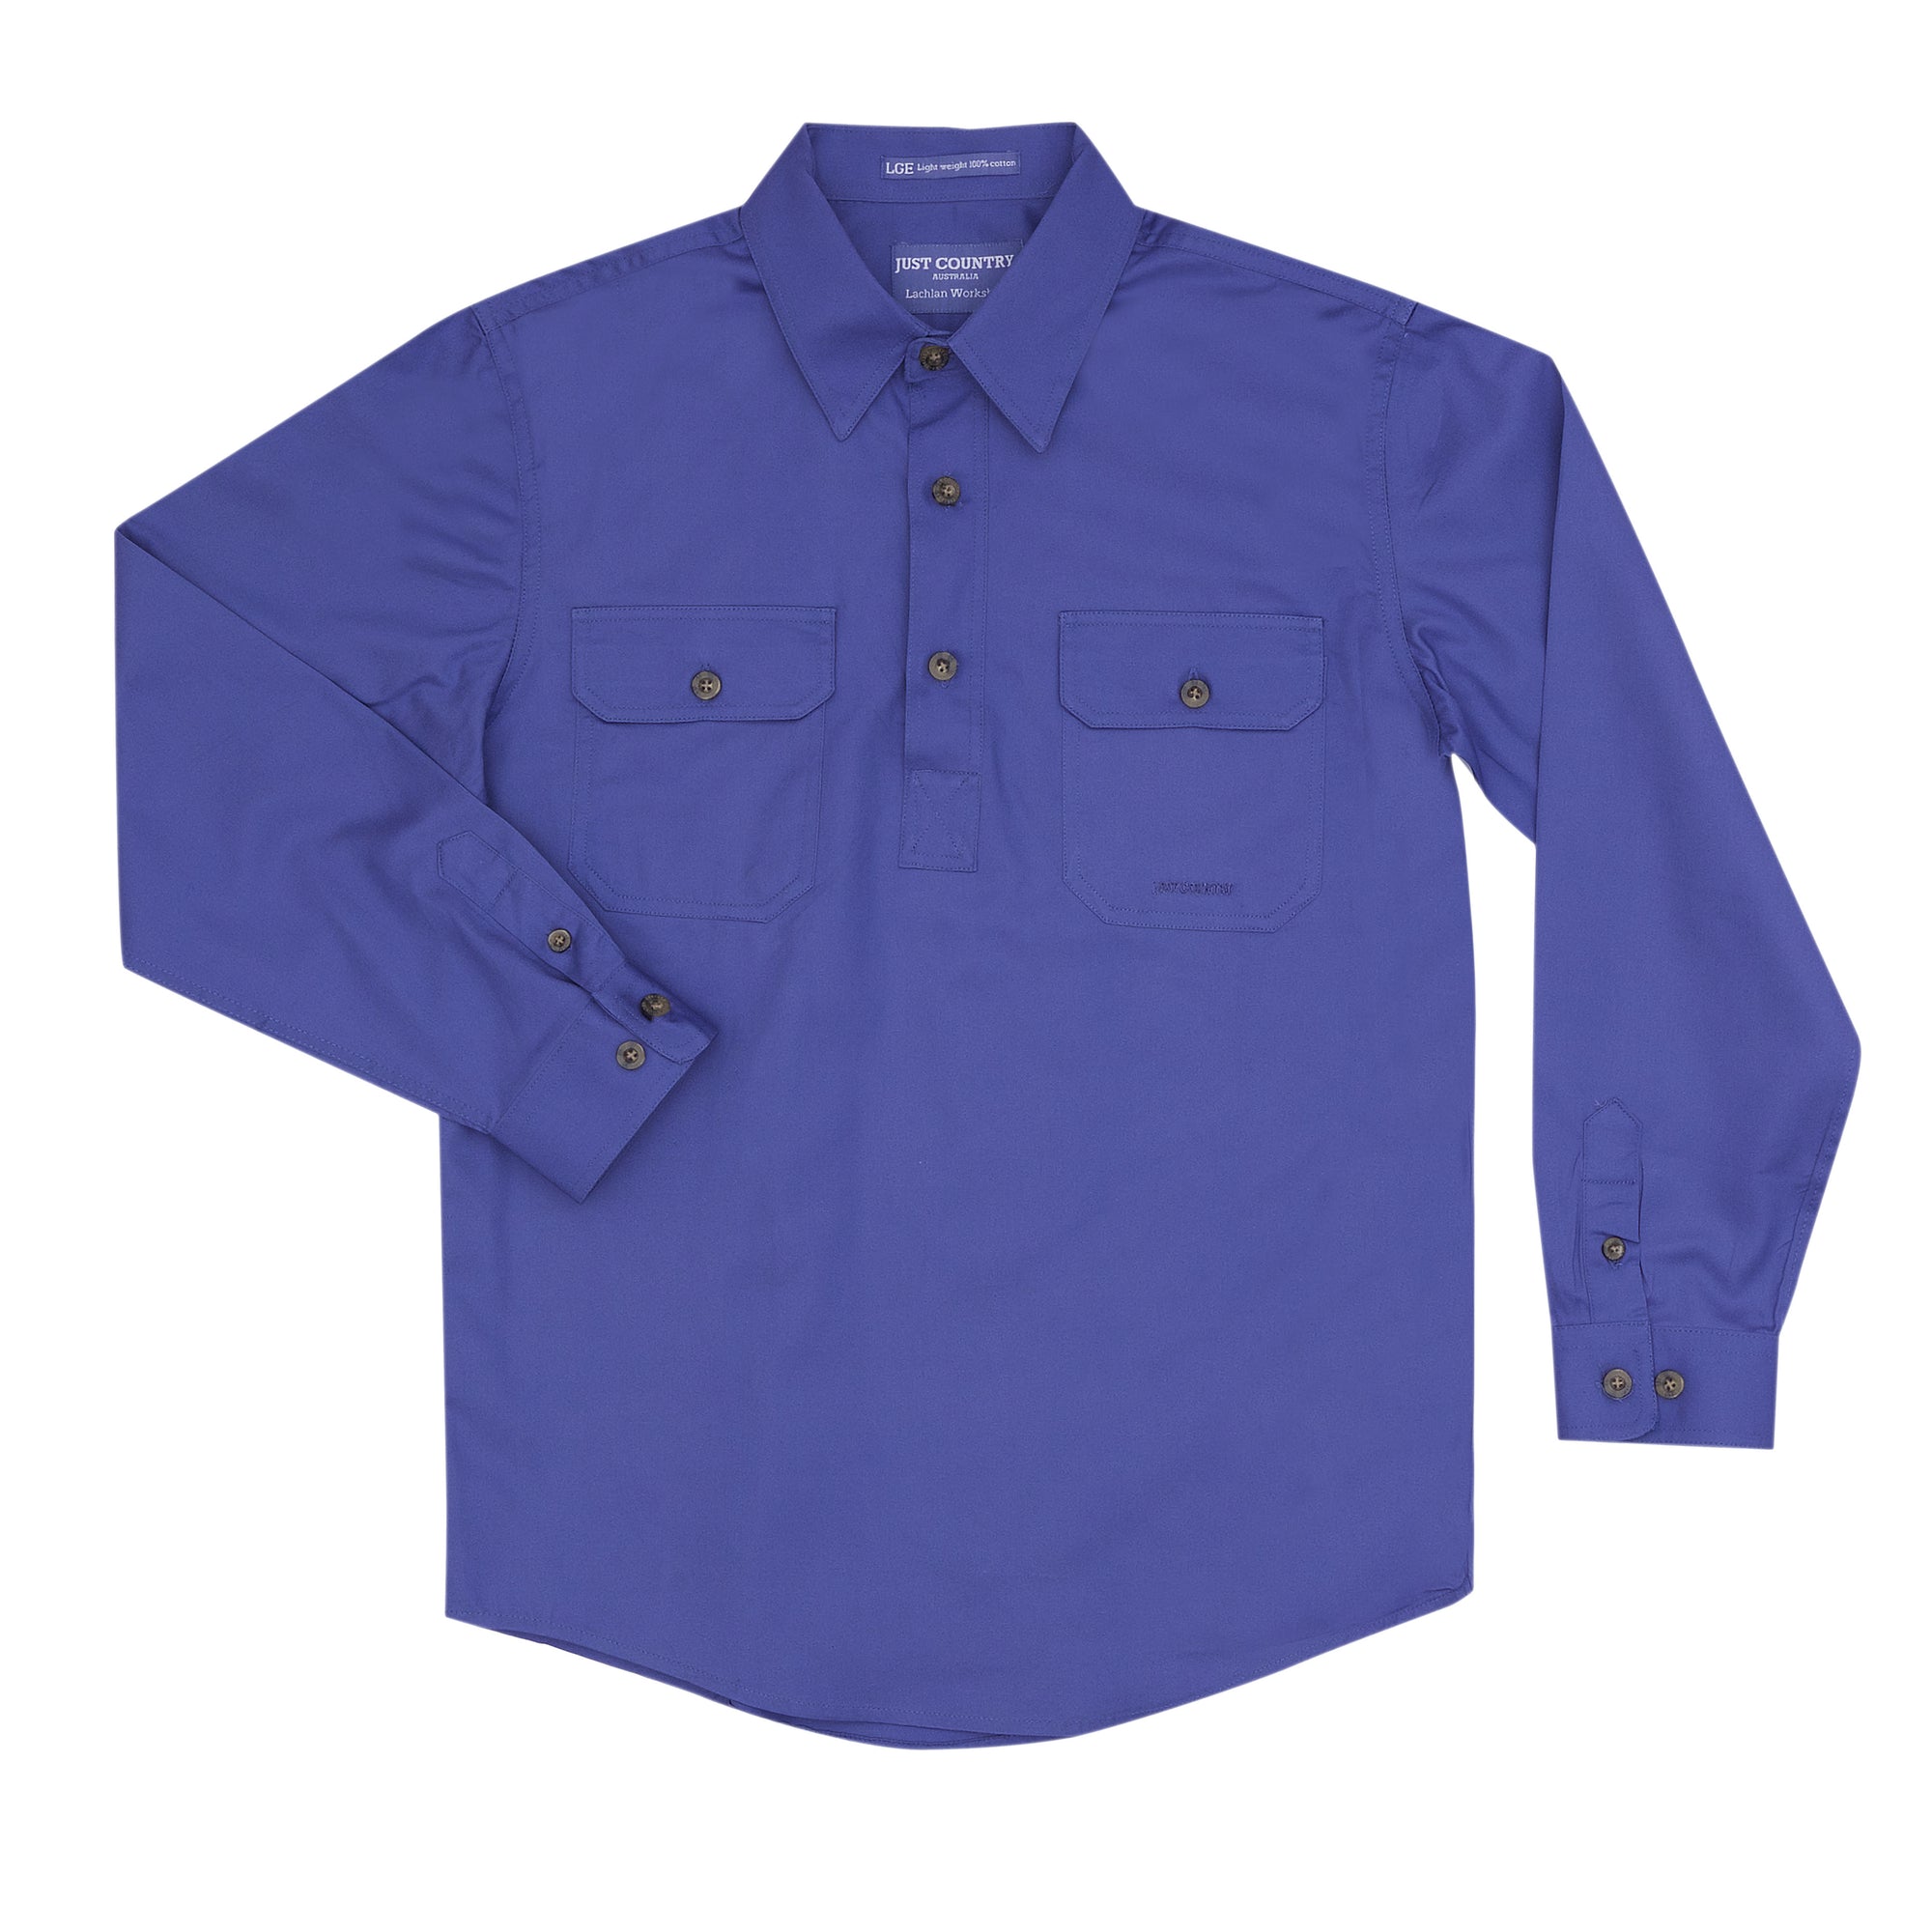 Just Country Workshirt Boys Lachlan Blue